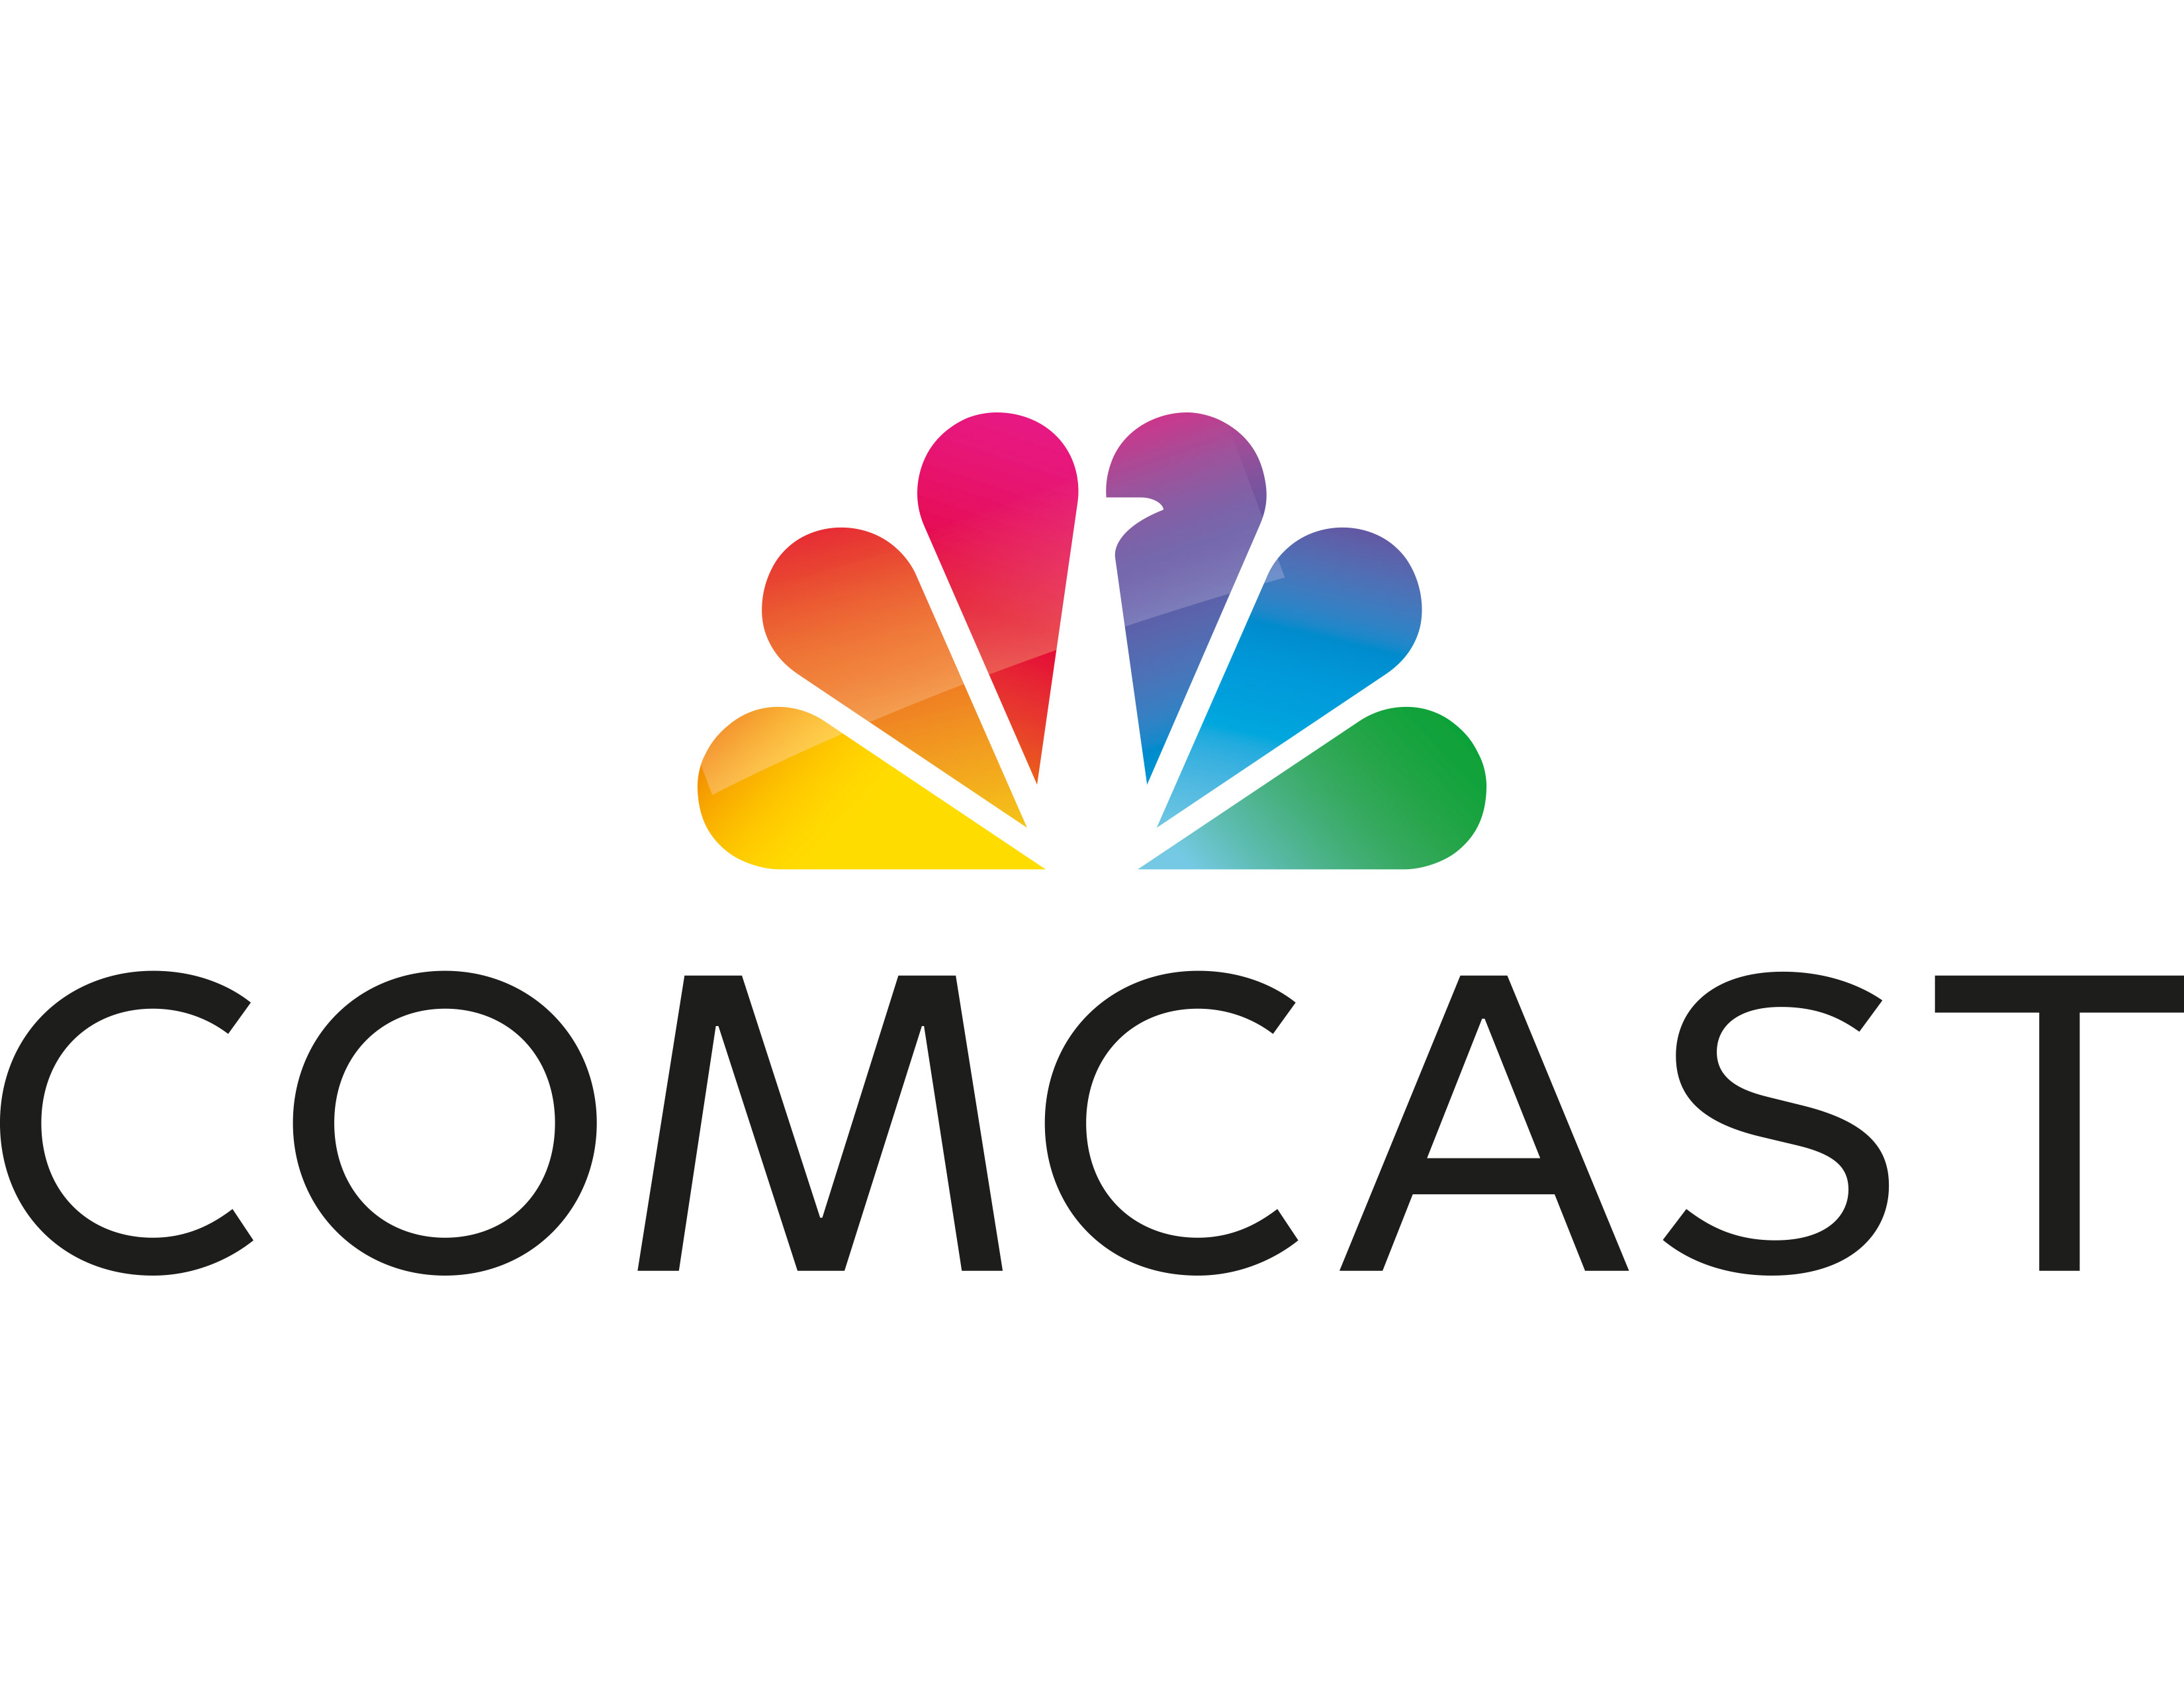 Viacomcbs And Comcast Announce Content Carriage Agreement